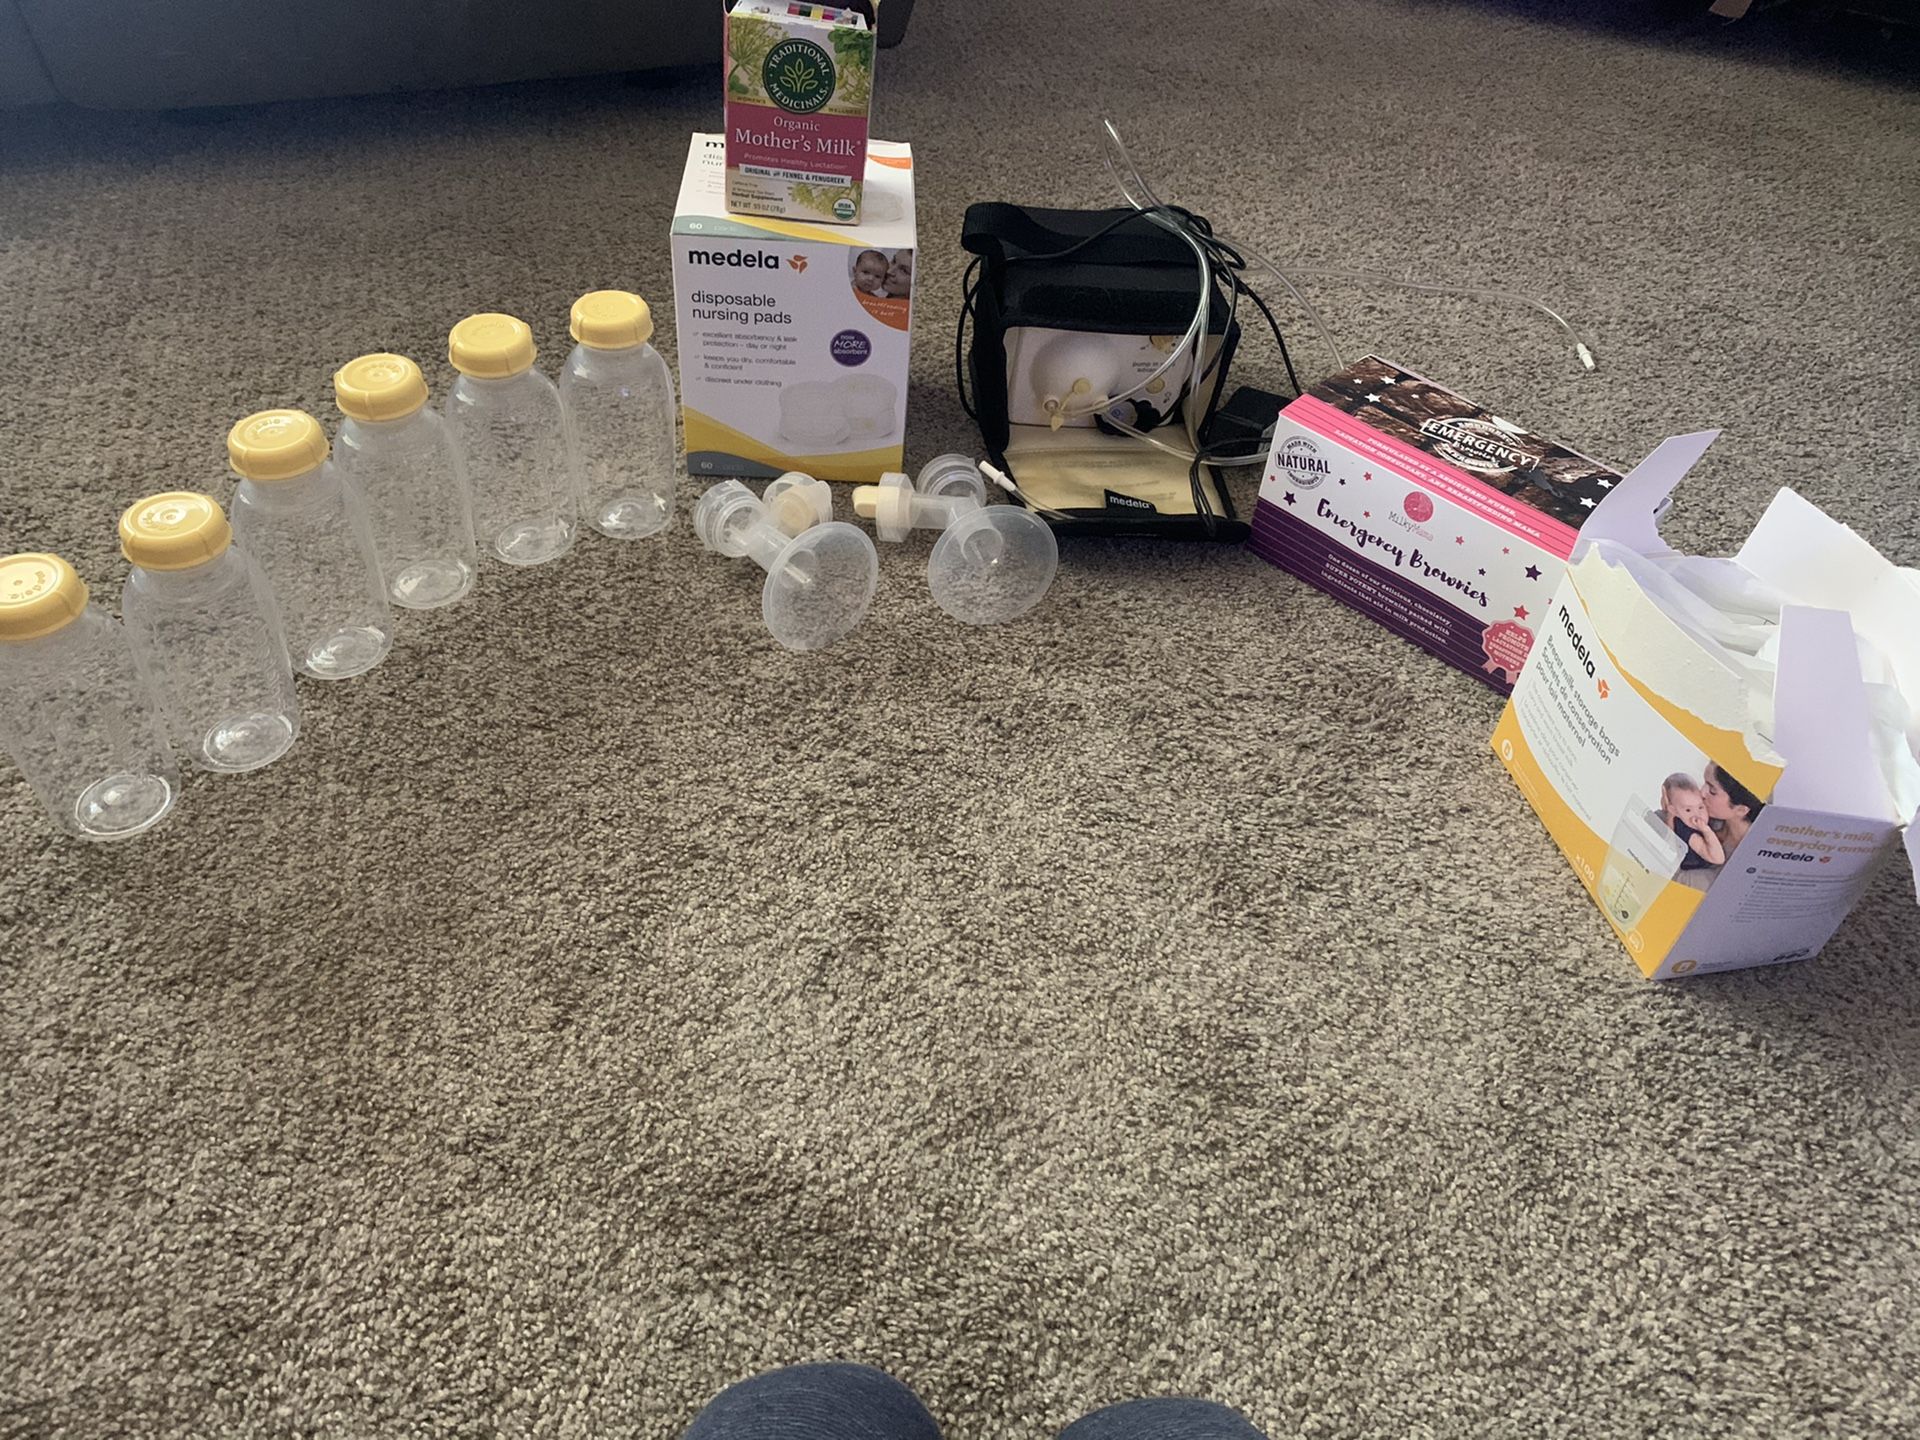 Medela breast pump and accessories